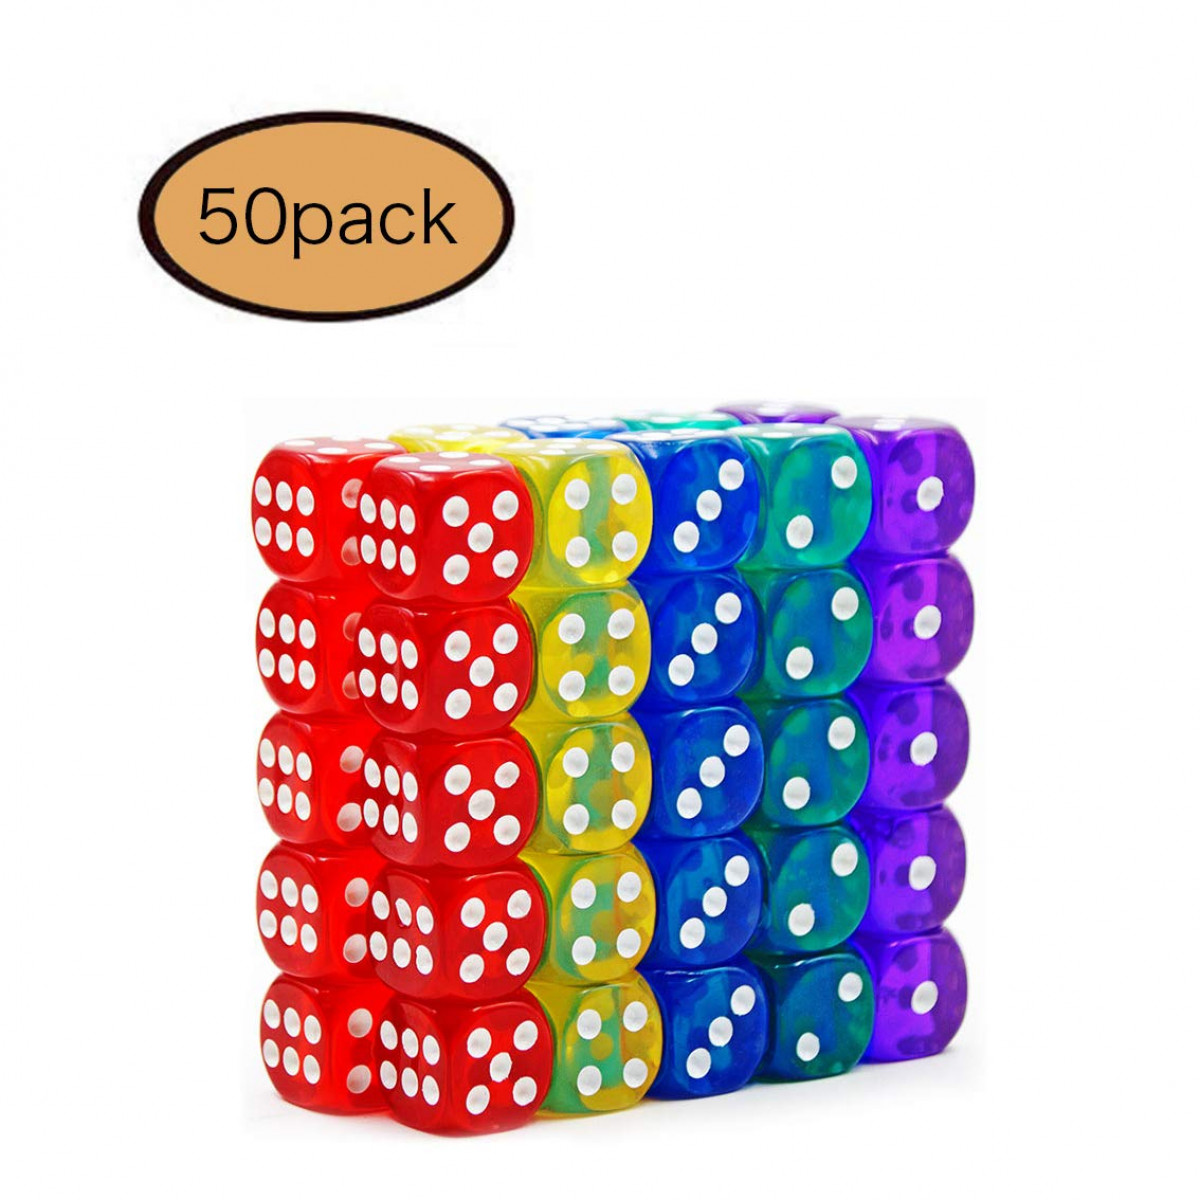 6-Sided Game Dice Set 5 Sets of Vintage Colors Dice for Board Games and Teaching Math Dice Set Classroom Accessories dice Set RPG dice 50 Pack Translucent Dice 